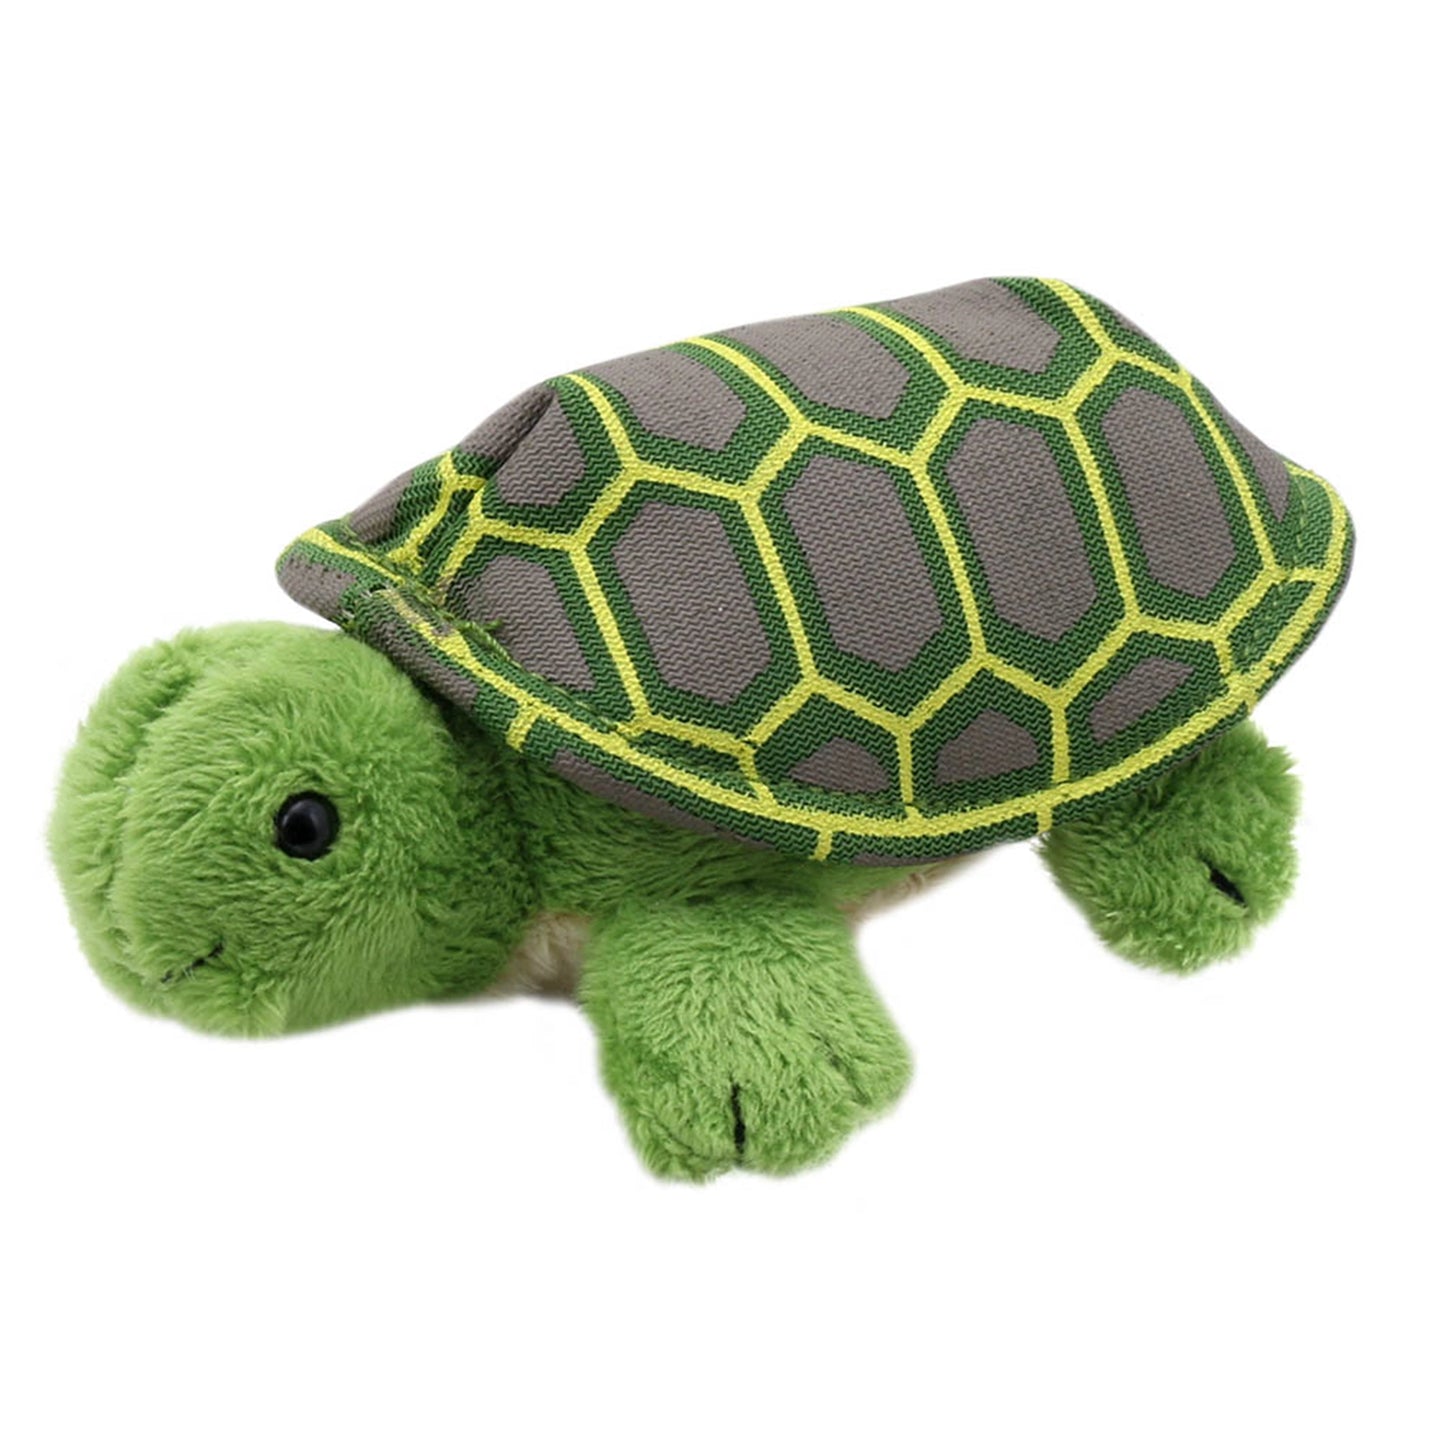 Tortoise Finger Puppet - The Puppet Company - The Forgotten Toy Shop